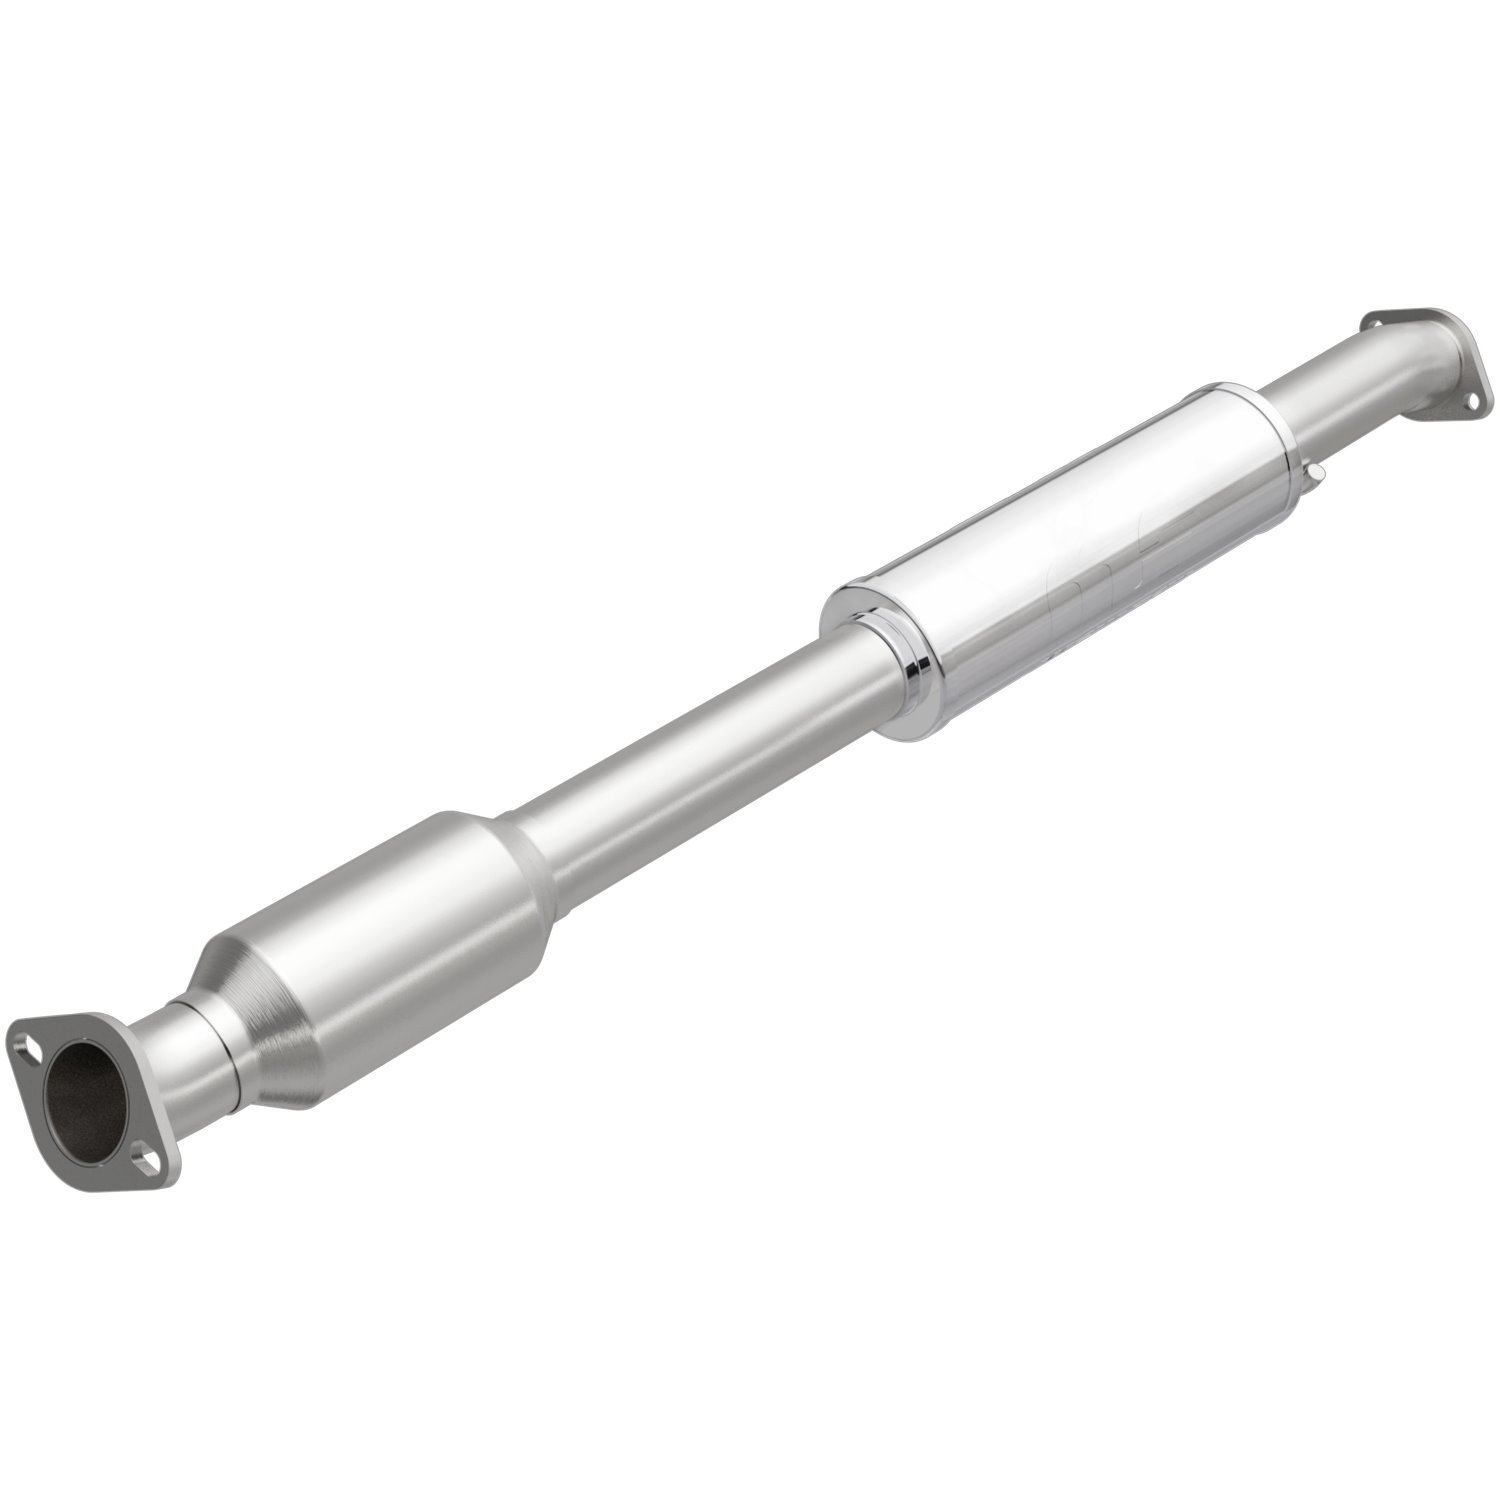 OEM Grade Federal / EPA Compliant Direct-Fit Catalytic Converter 21-144